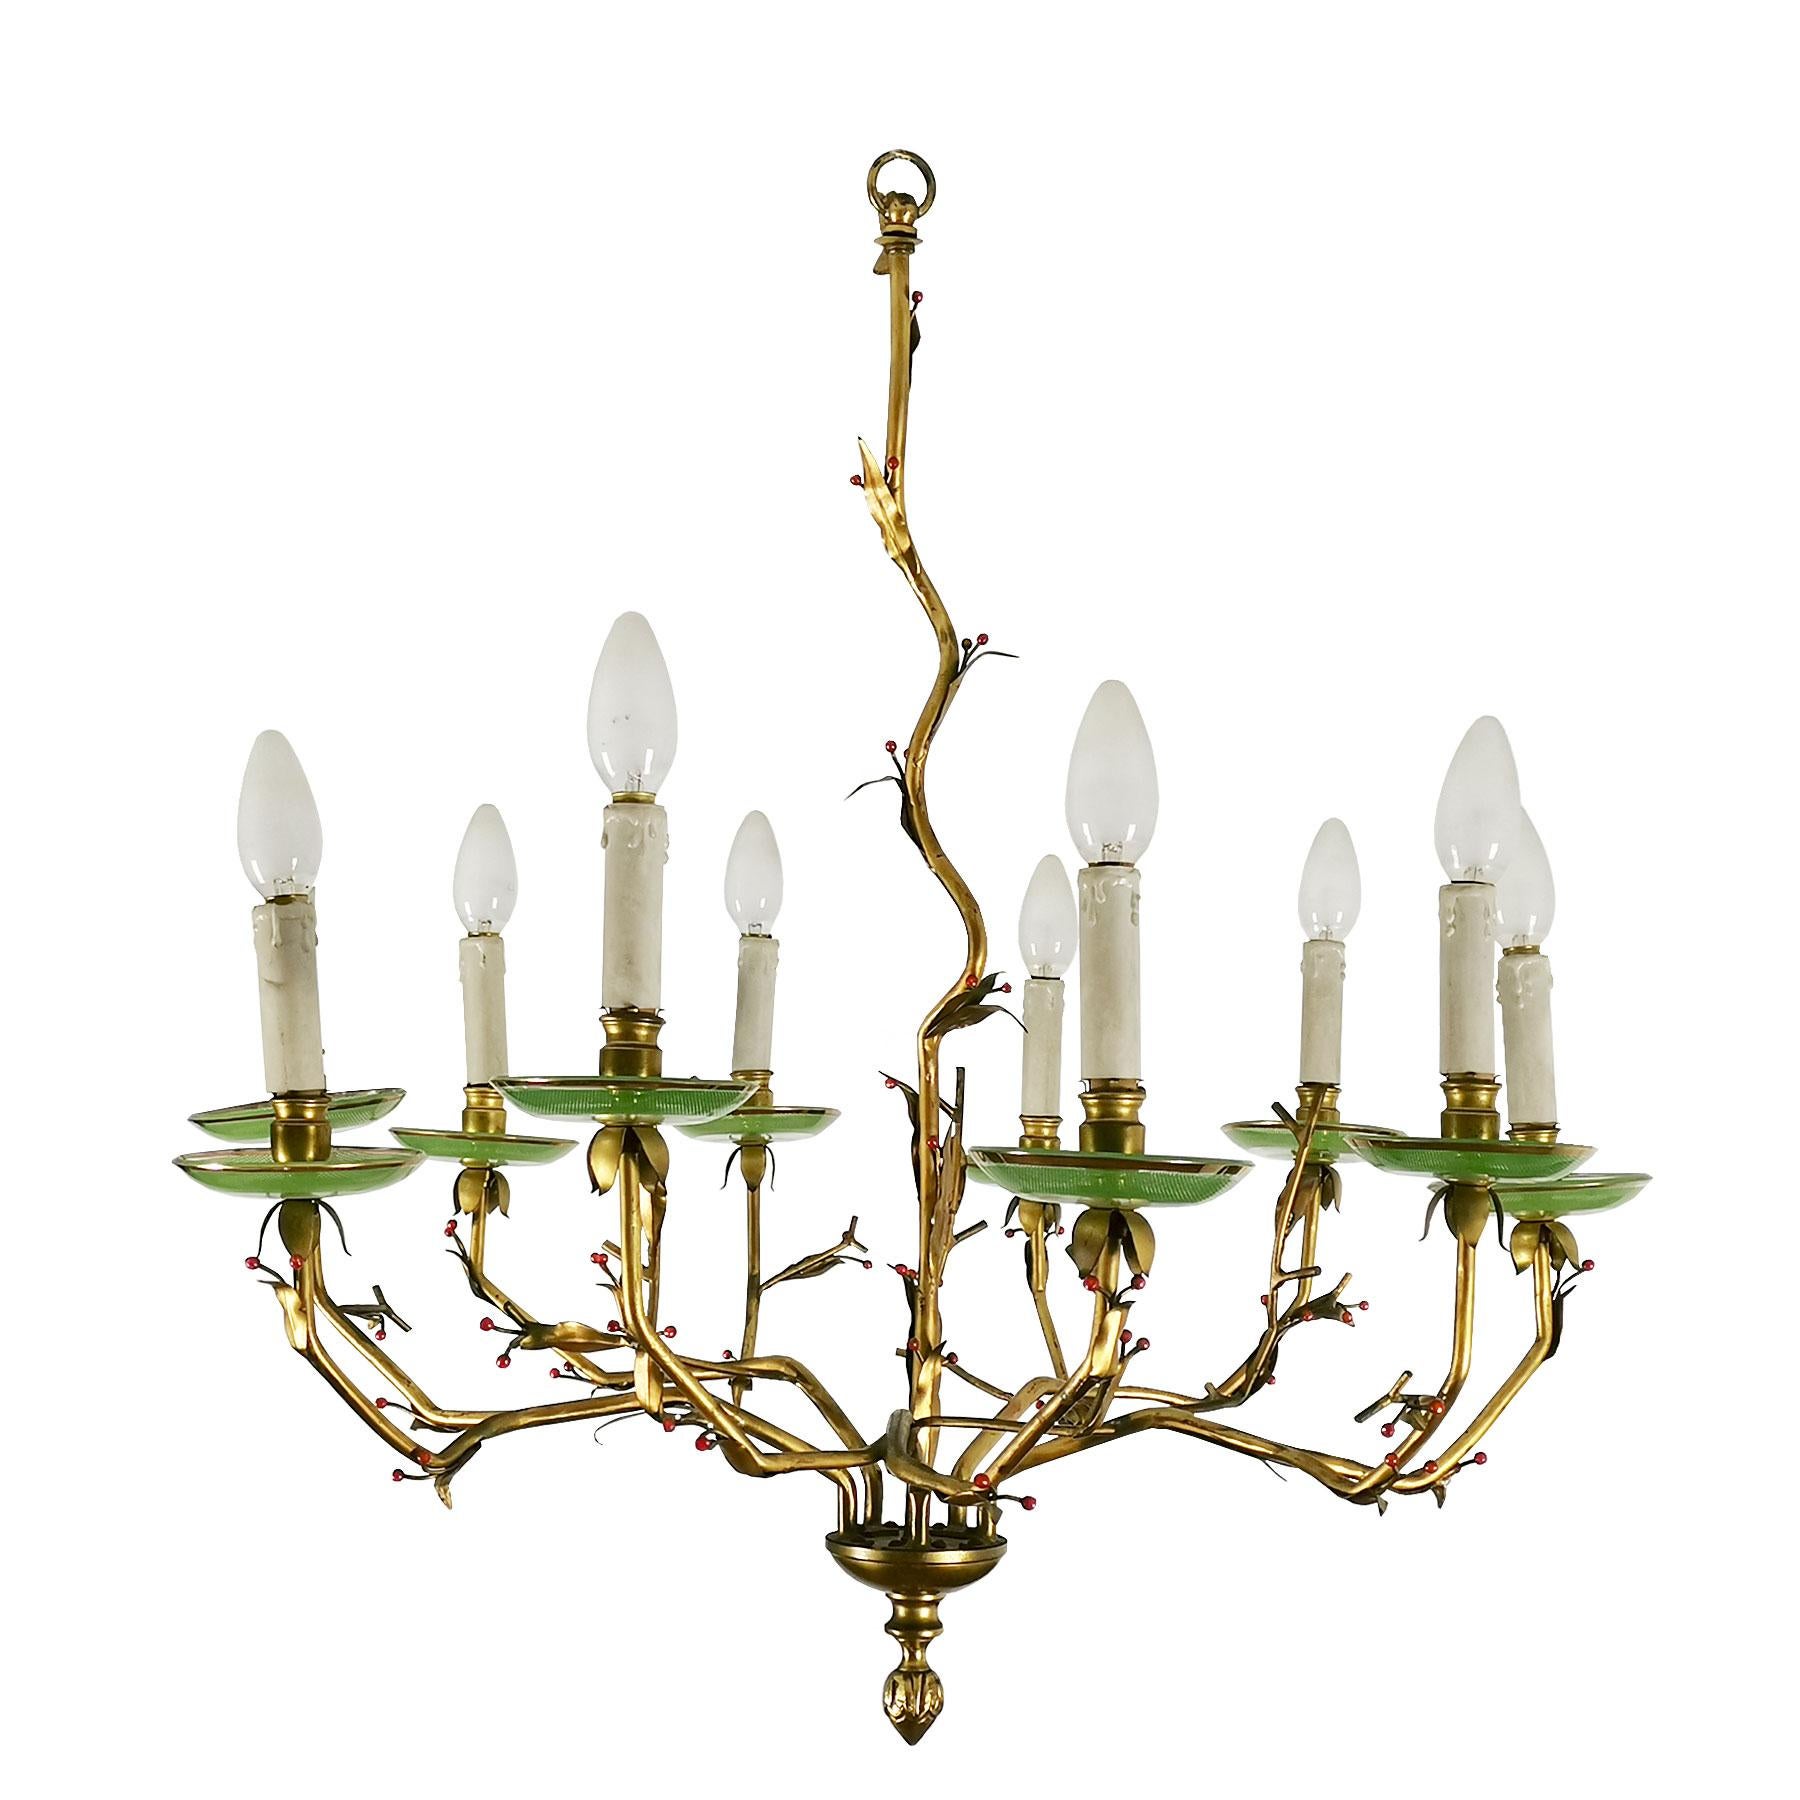 Chandelier with 10 branches in golden bronze, leaves and small false coral balls decoration. Acid engraved glass saucers with a golden line and original false candles.

Spain, circa 1950.